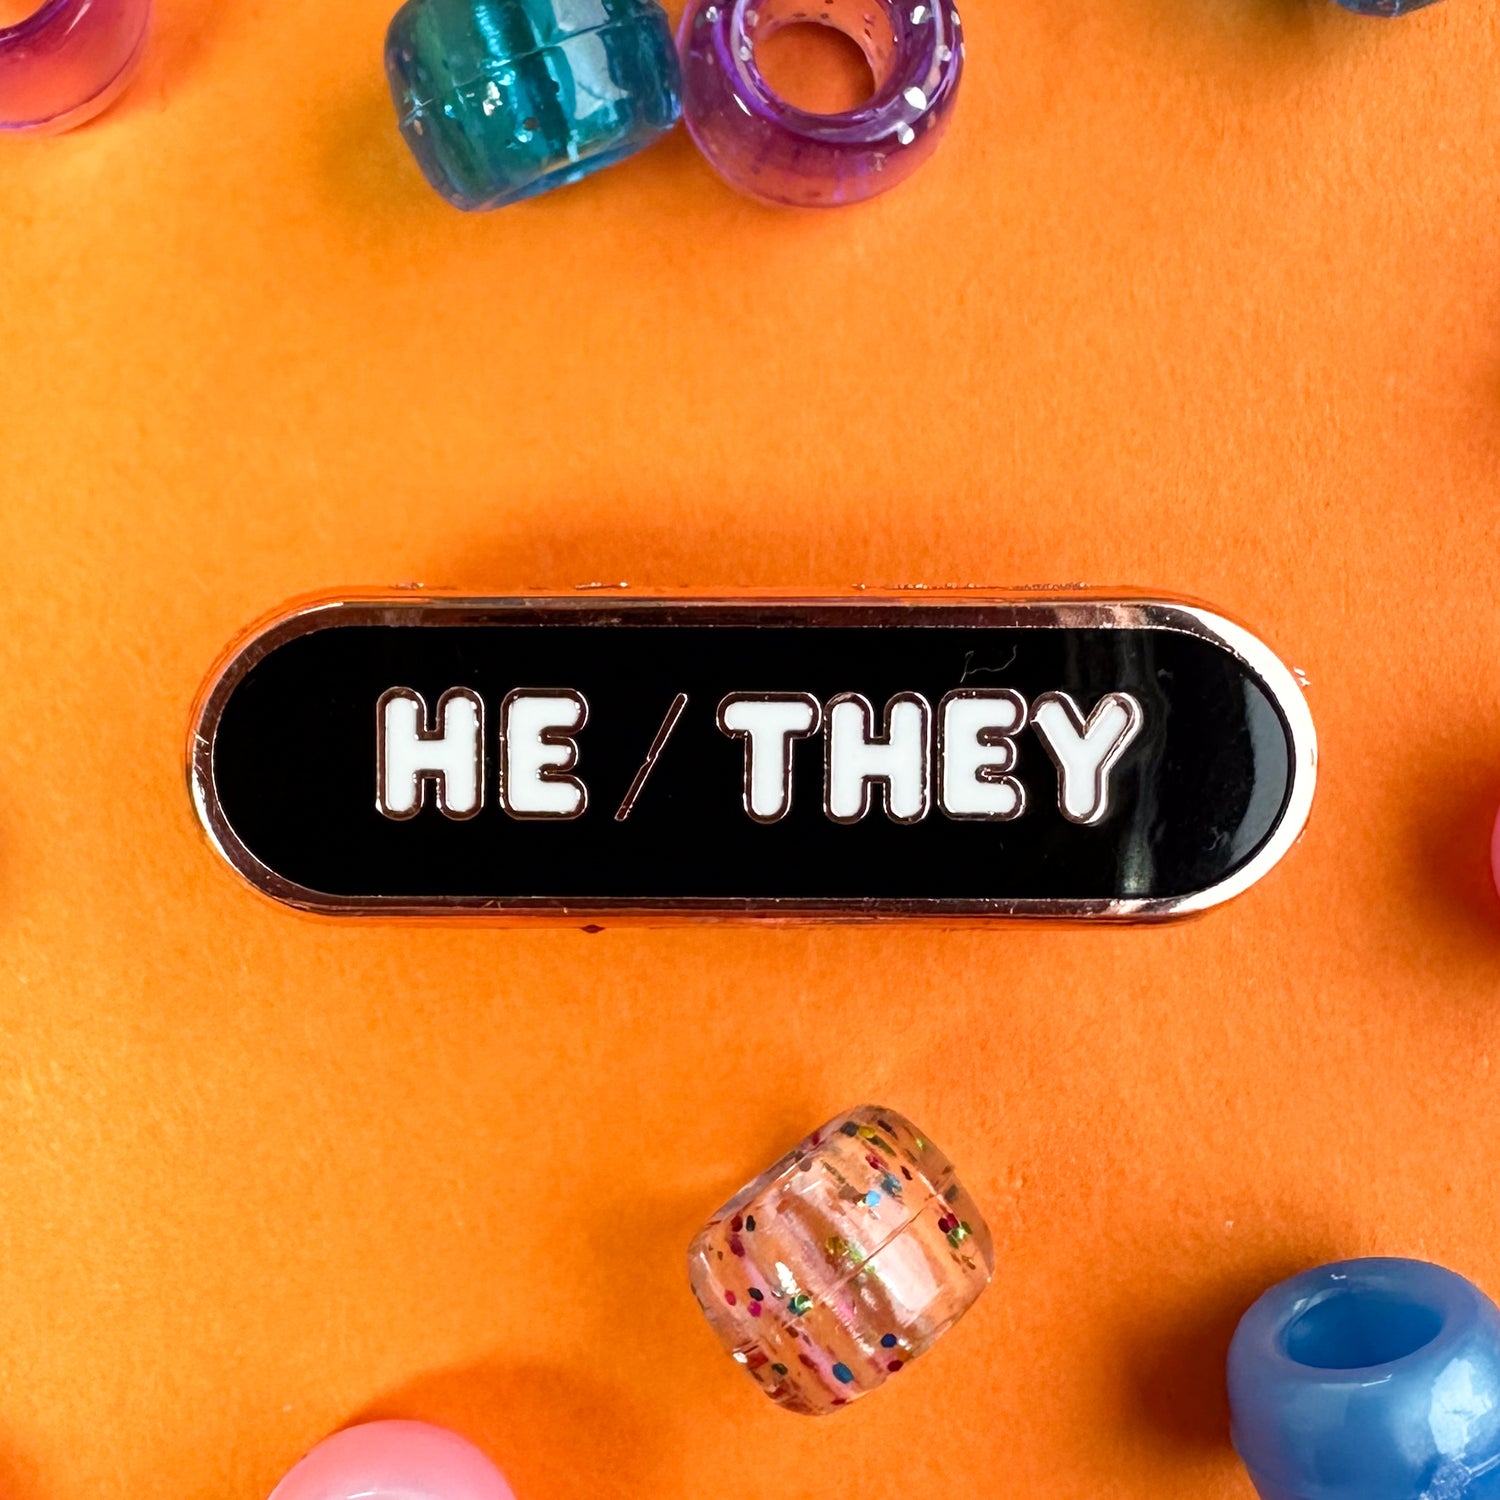 A black capsule shaped pin with white bubble letters that spell "He/They" to share your pronouns. The pin is on an orange background with pony beads around.